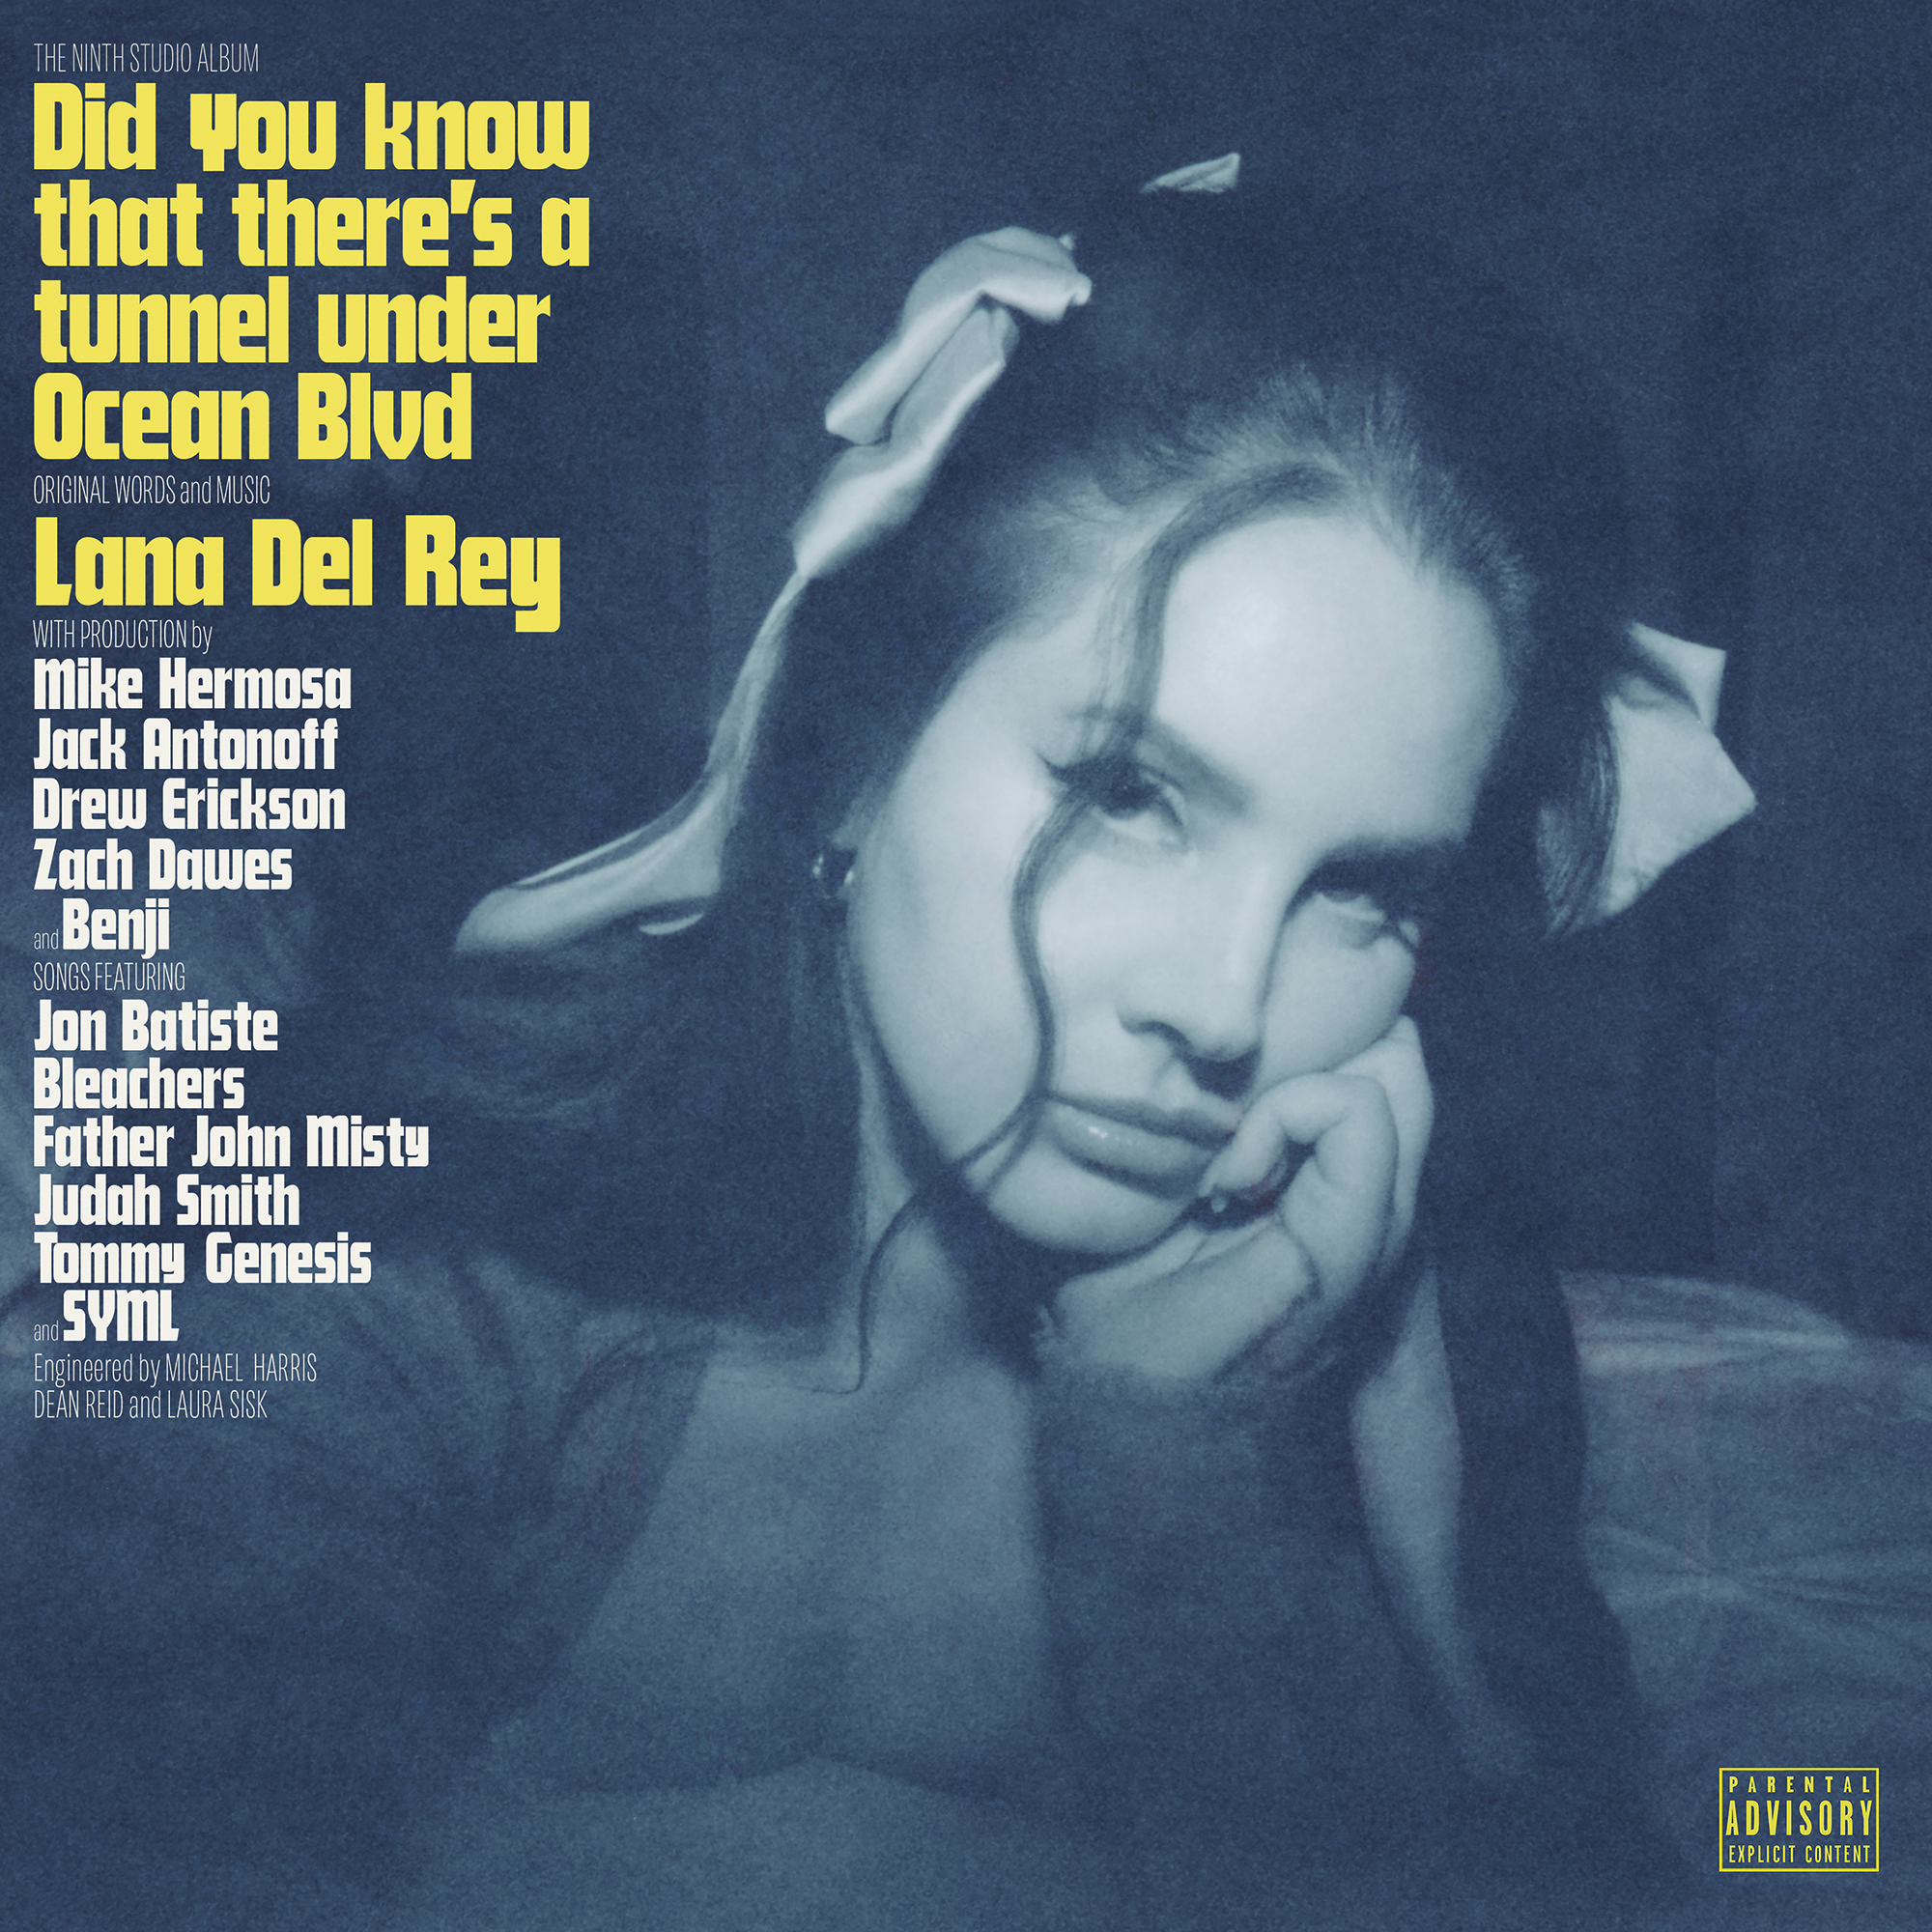 Lana Del Rey Revisits Her Past on Did you know that there's a